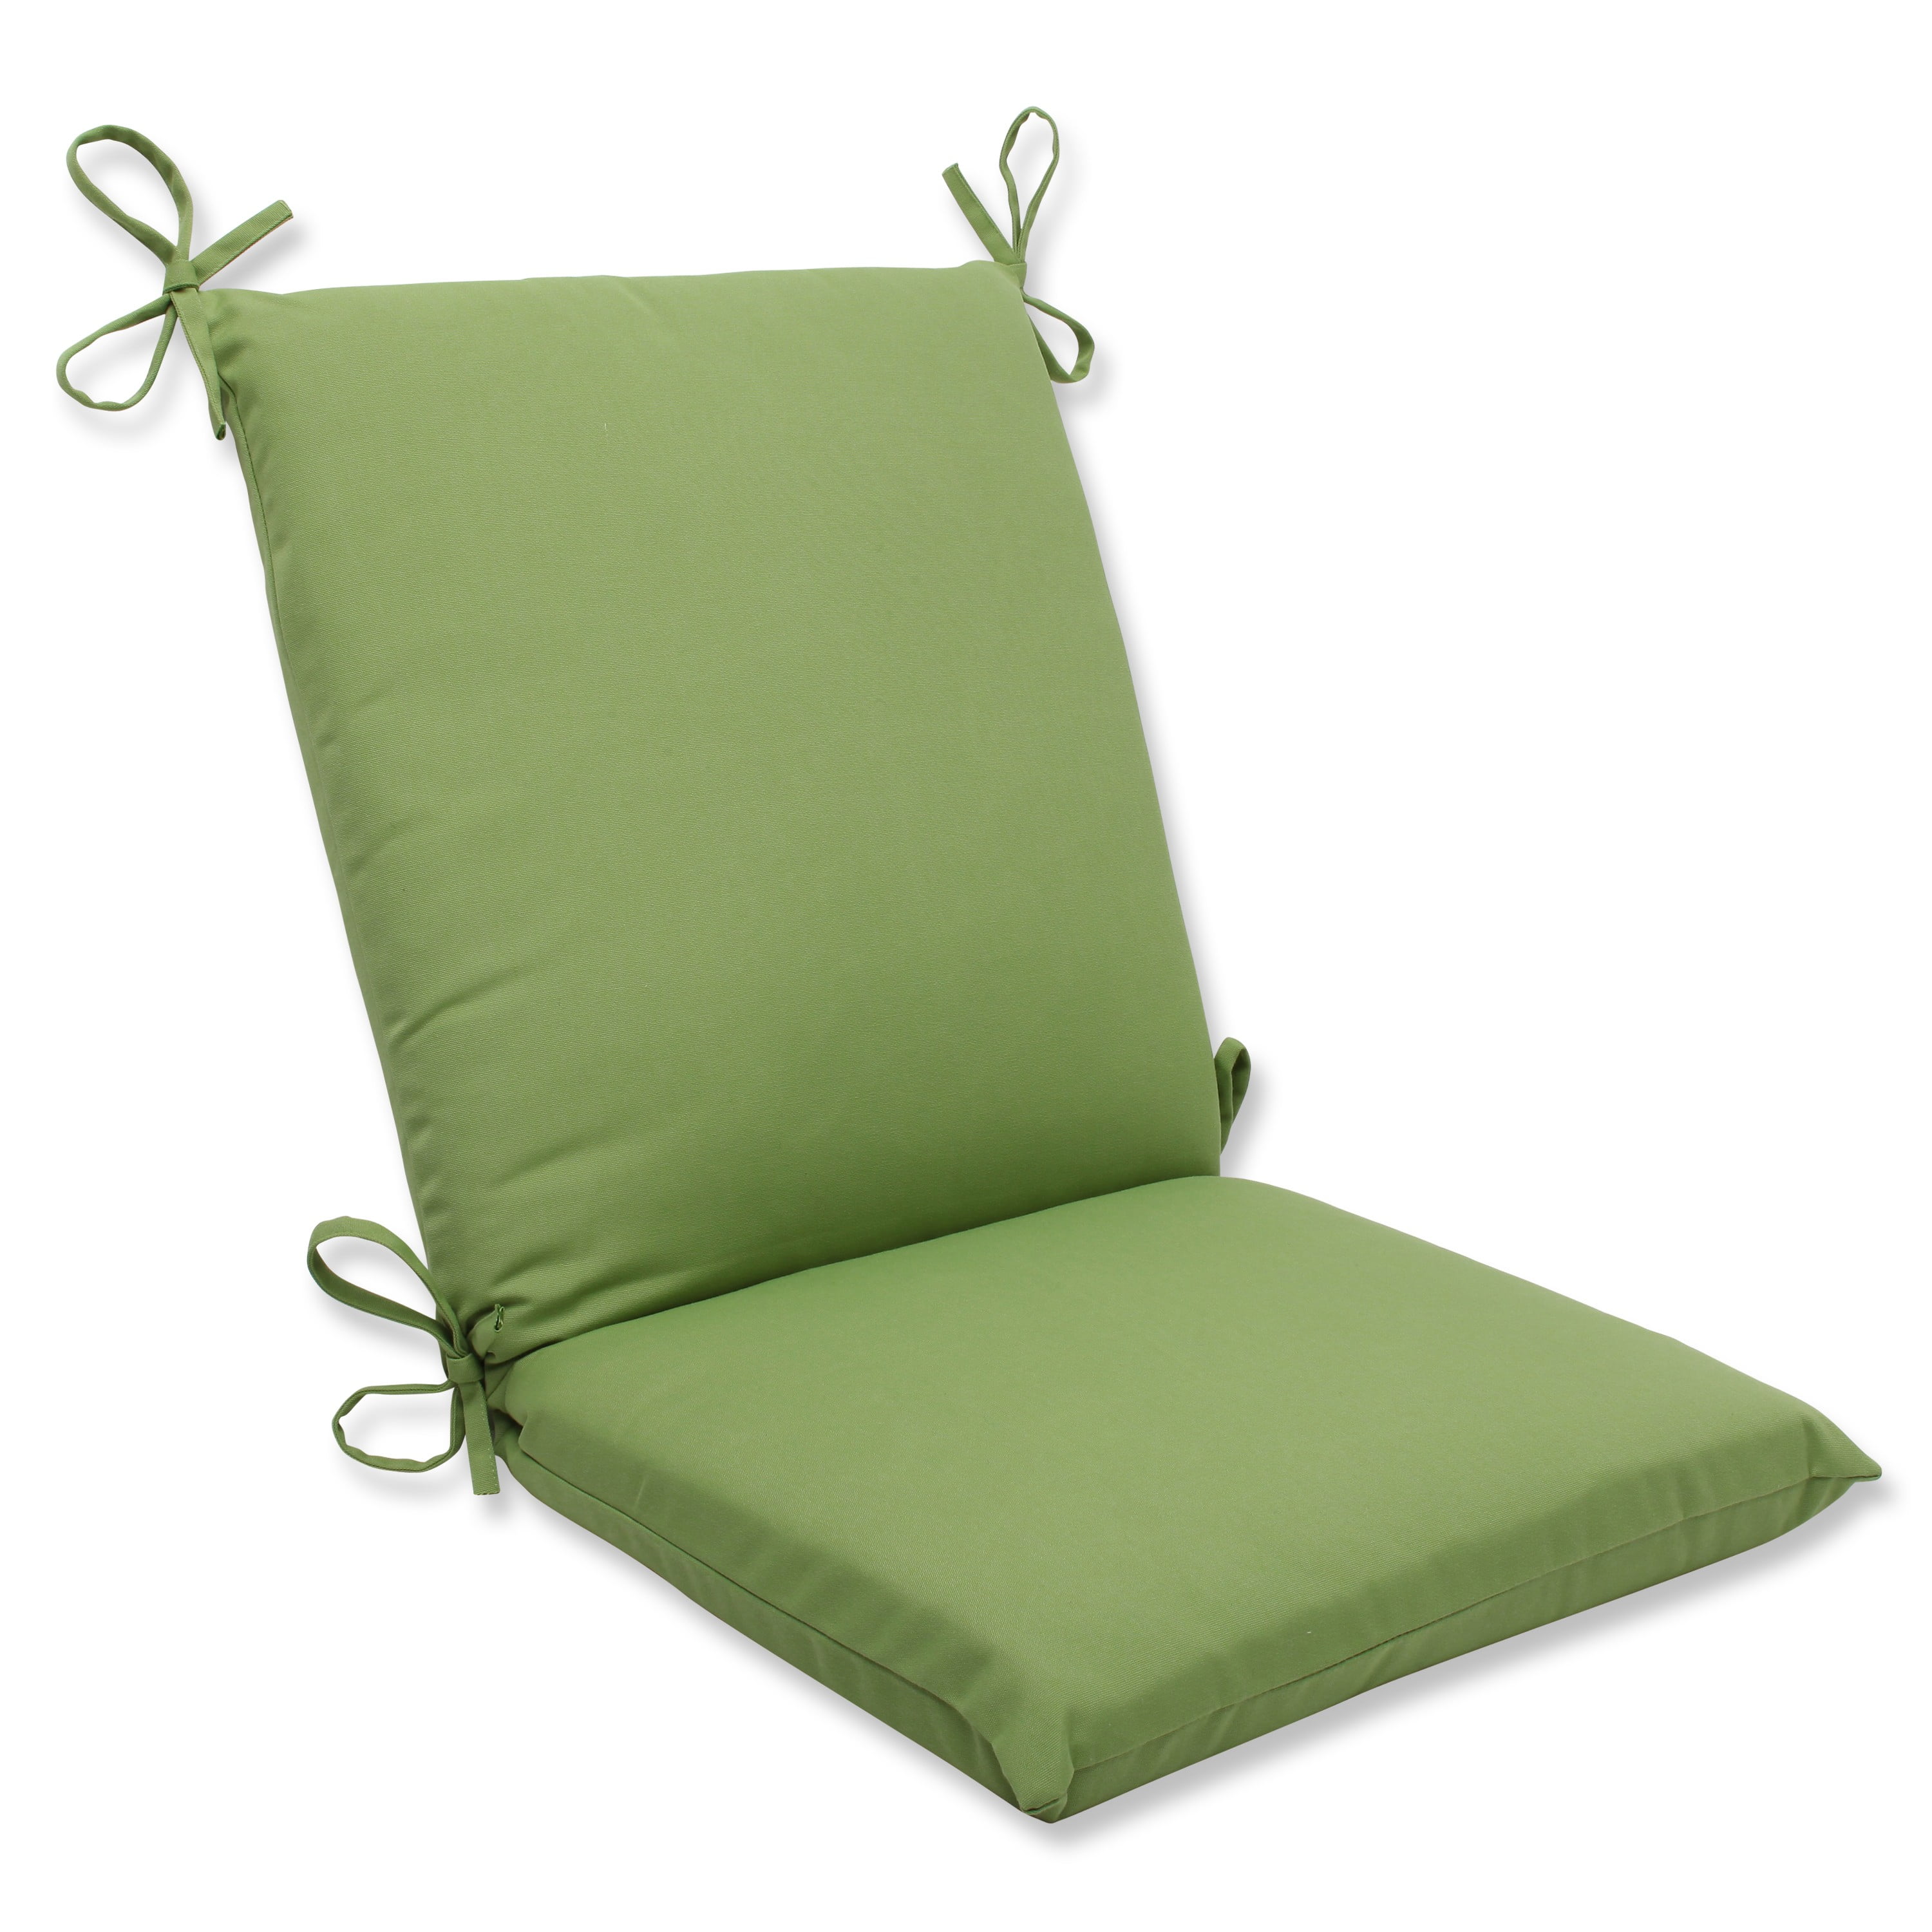 Unique Chair Cushions With Ties Outdoor with Simple Decor